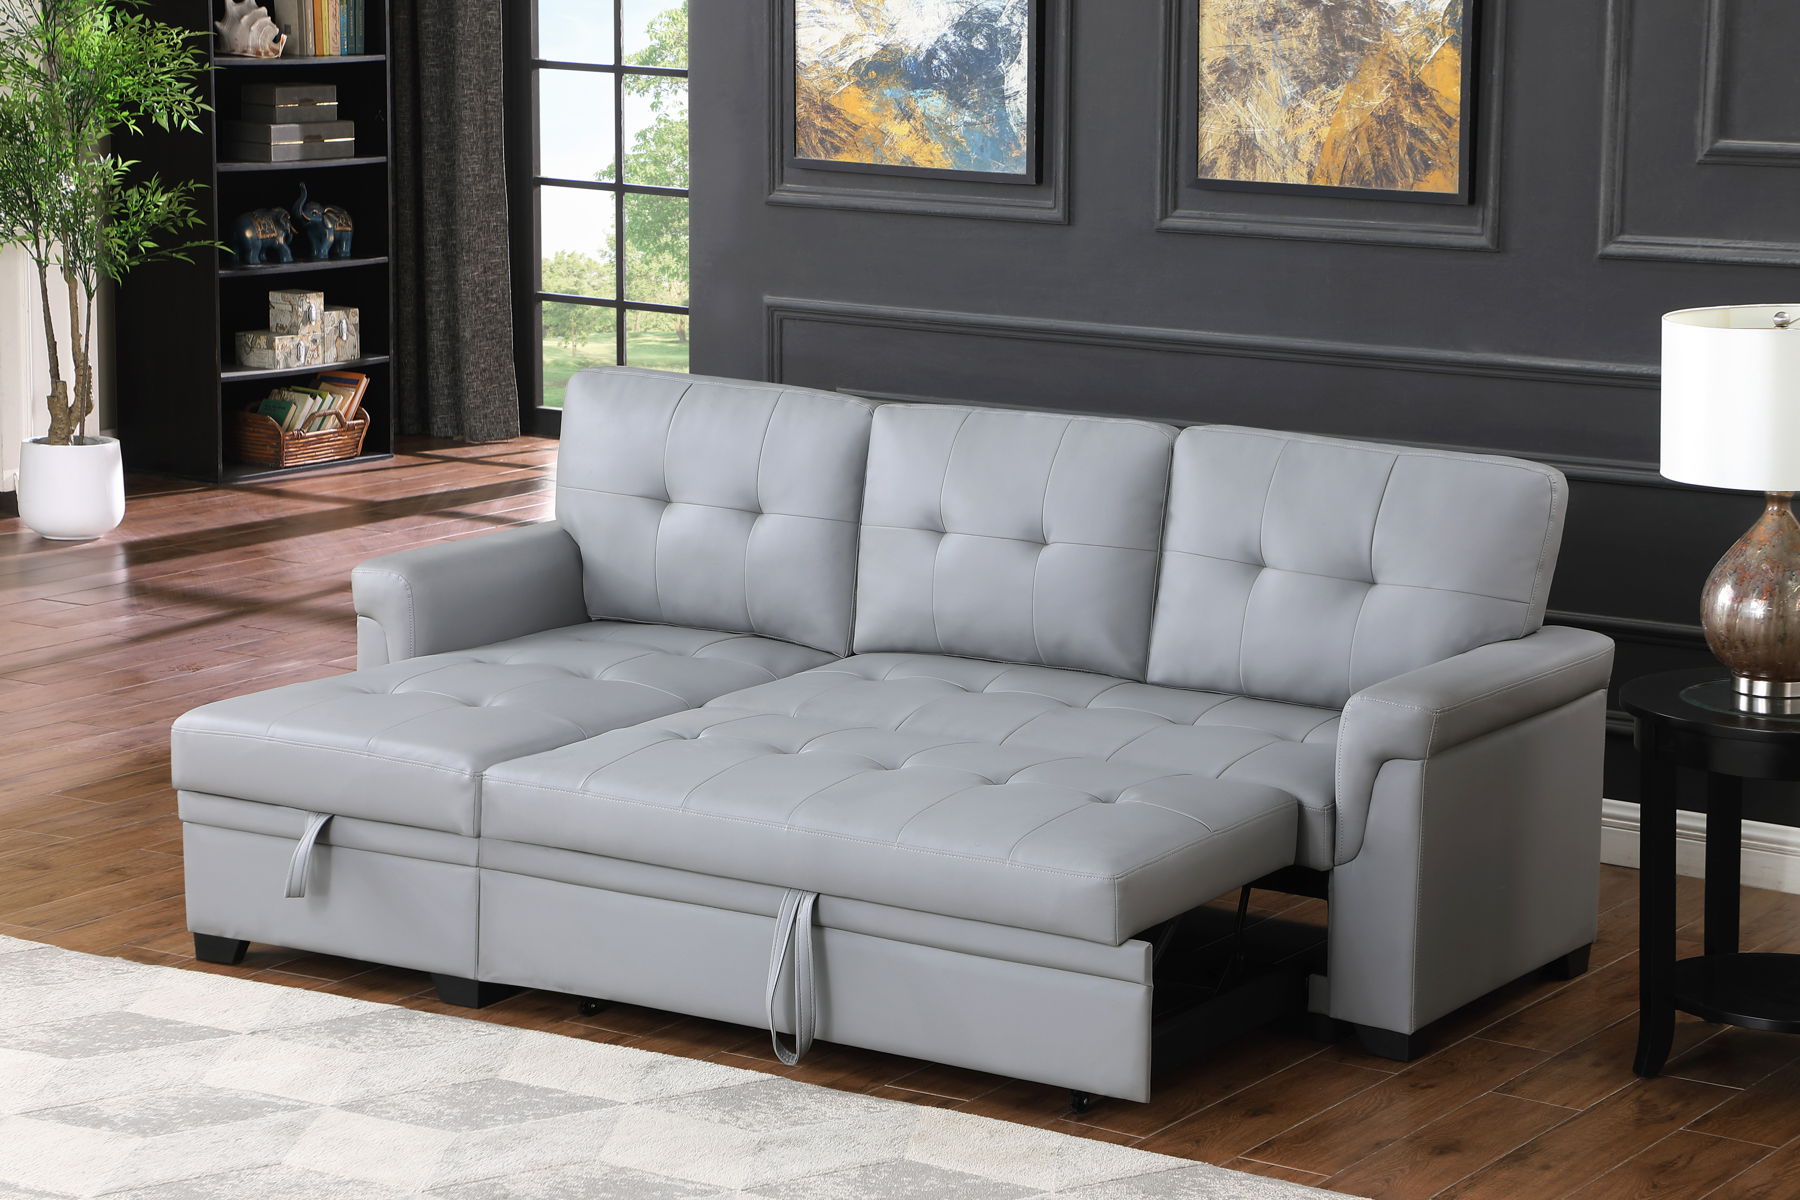 Lexi - Vegan Leather Modern Reversible Sleeper Sectional Sofa With Storage Chaise